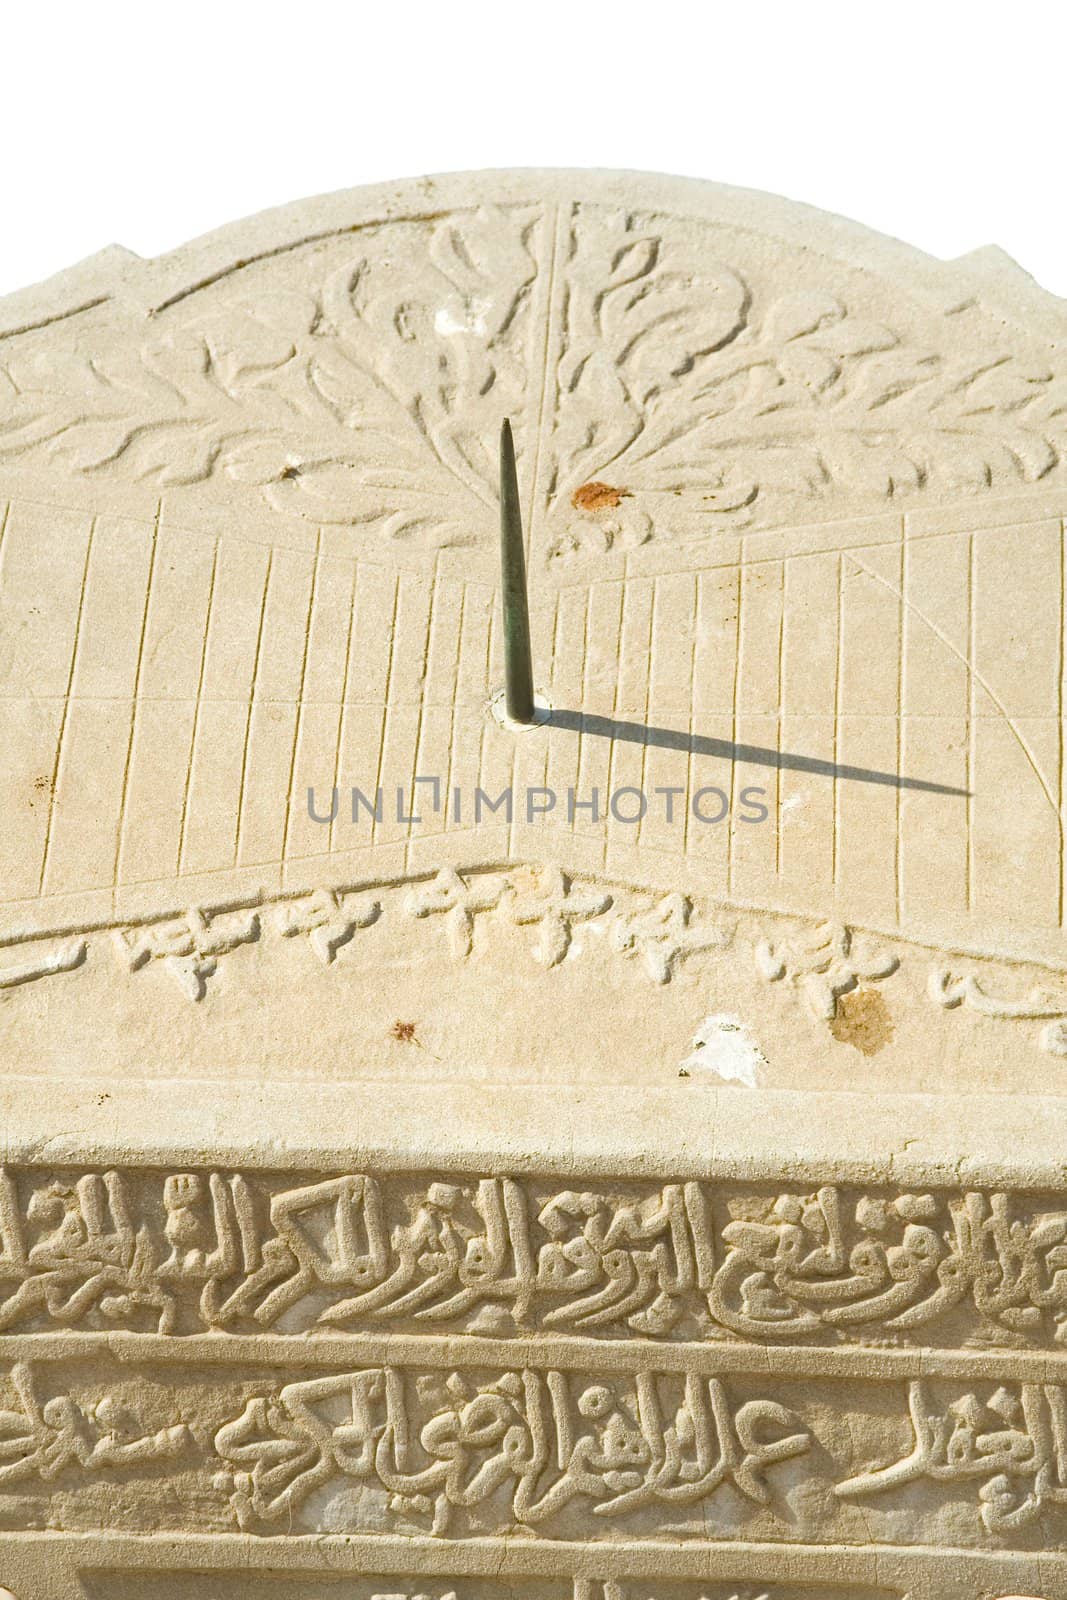 Medieval Arab sundial. Isolated object